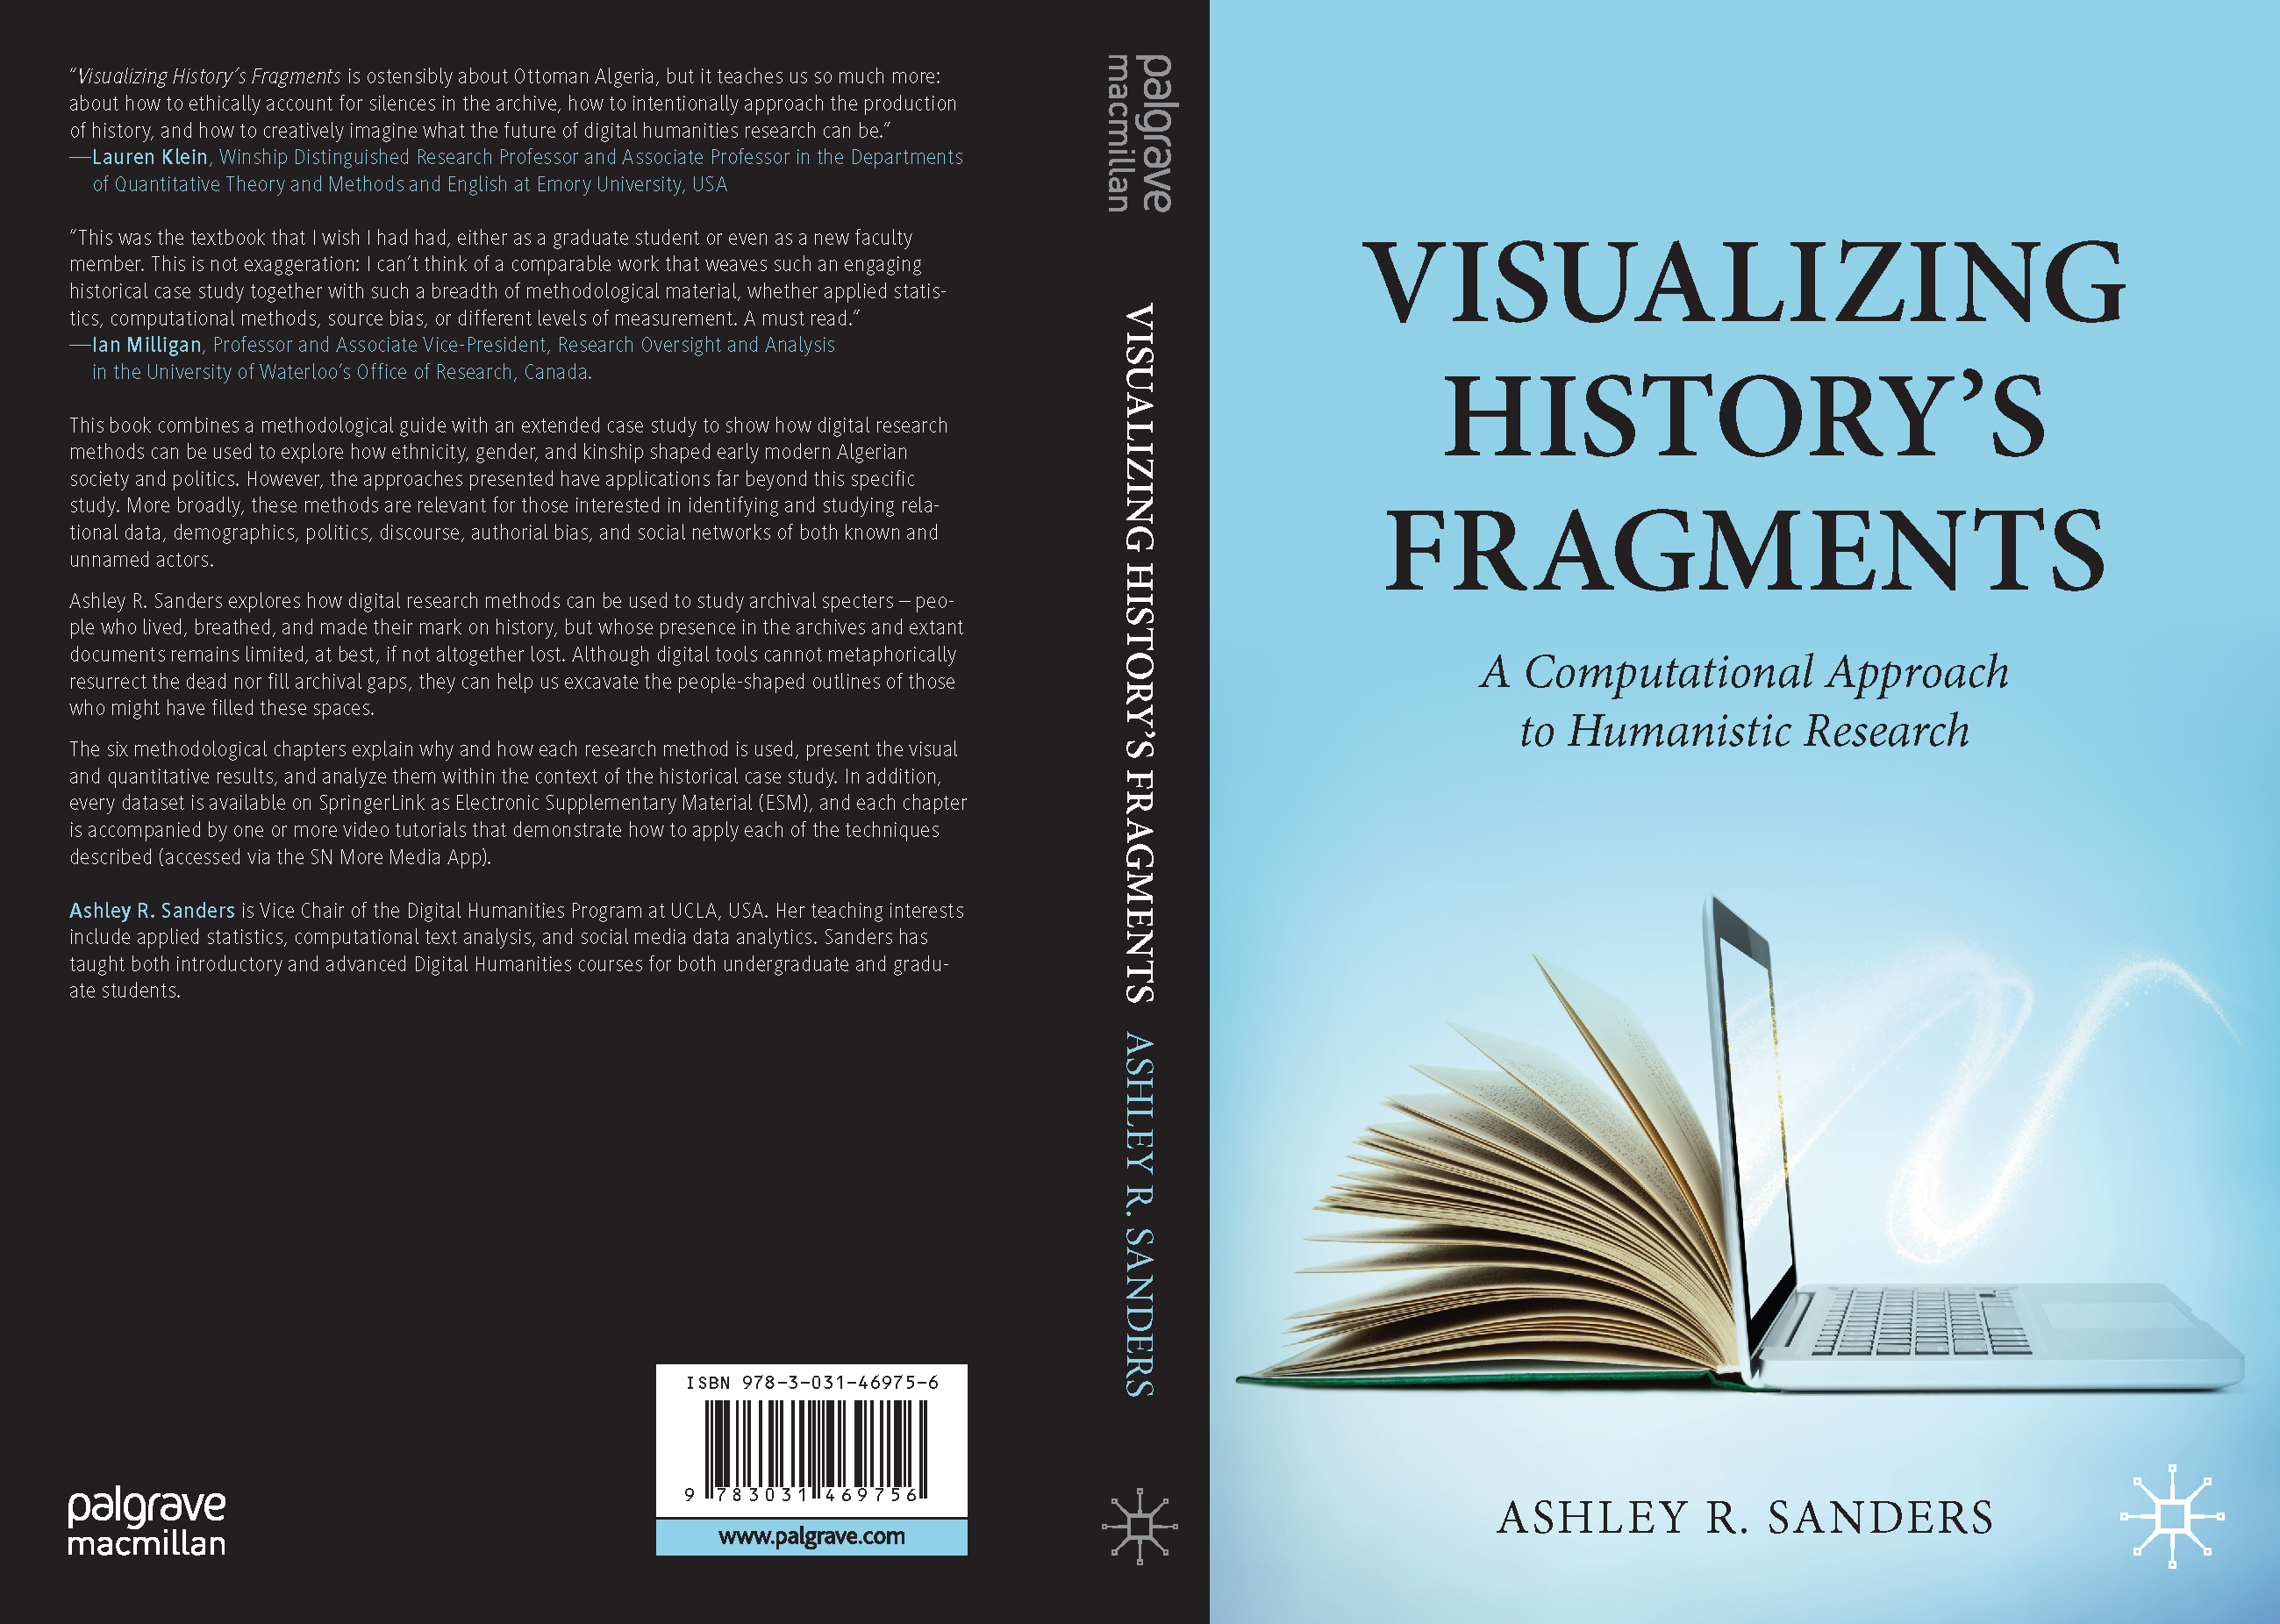 Book cover image for Visualizing History's Fragments